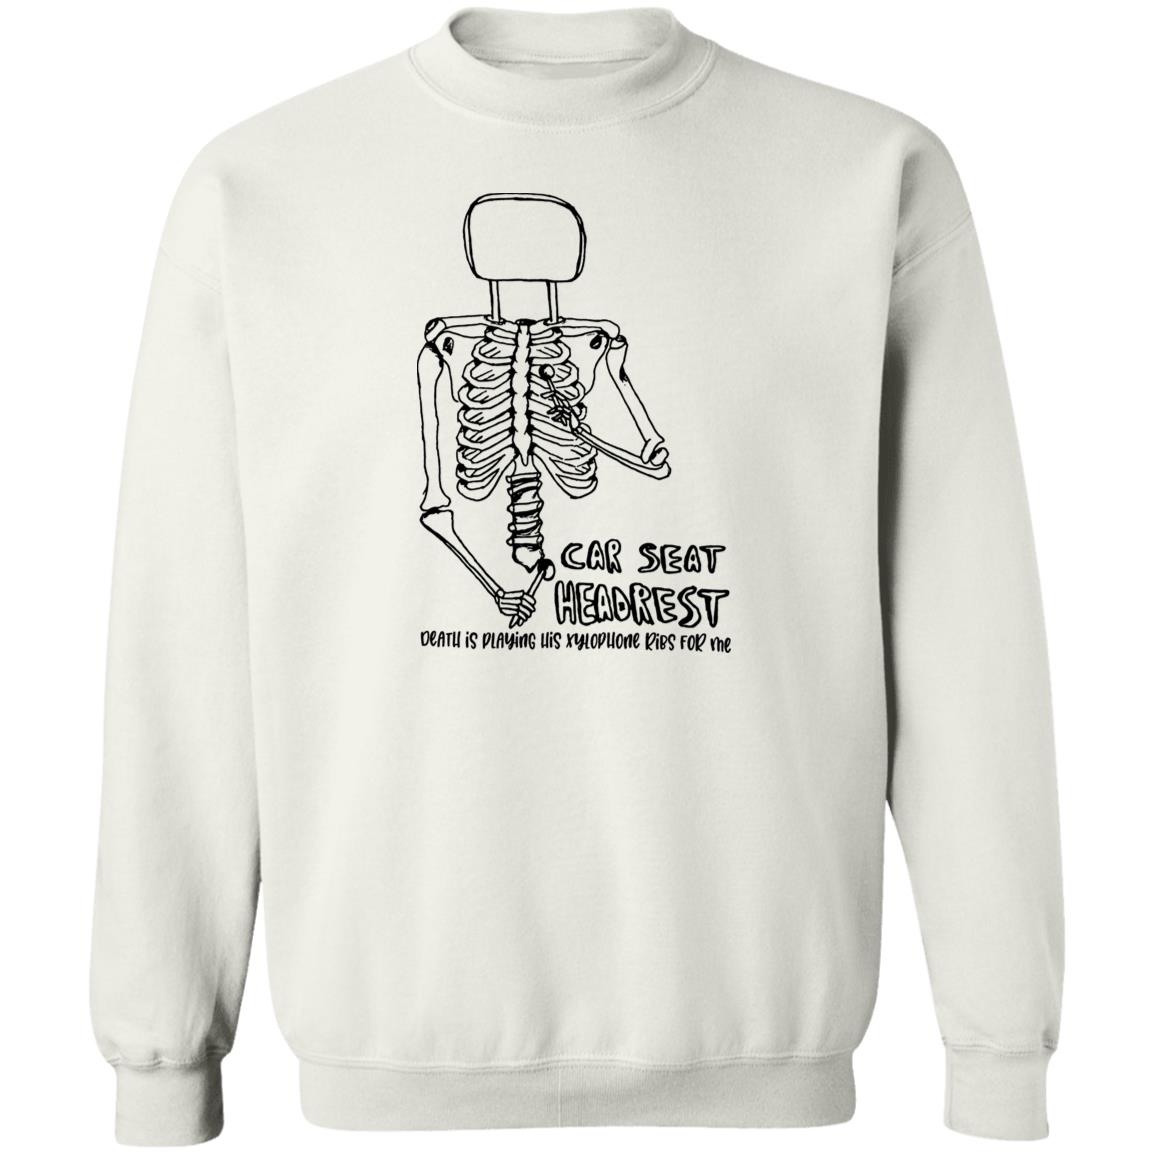 Car Seat Headrest Death Is Playing His Xylophone Ribs For Me Shirt 1